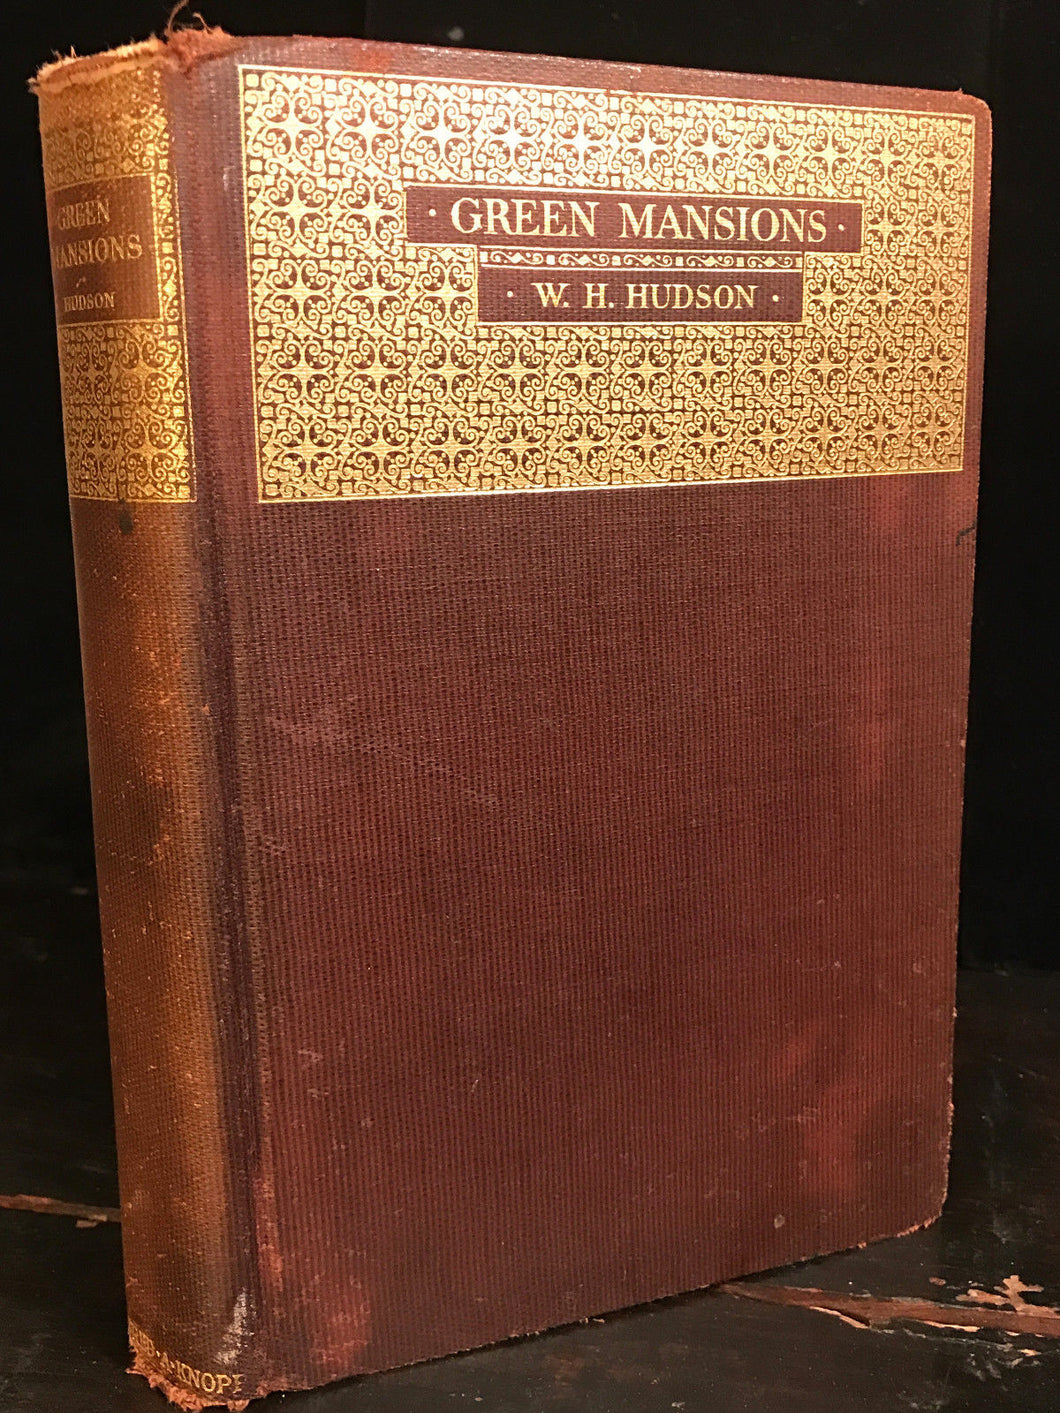 GREEN MANSIONS by W.H. HUDSON ~ LIMITED 1st EDITION 1925, No. 516 of 3000 Copies